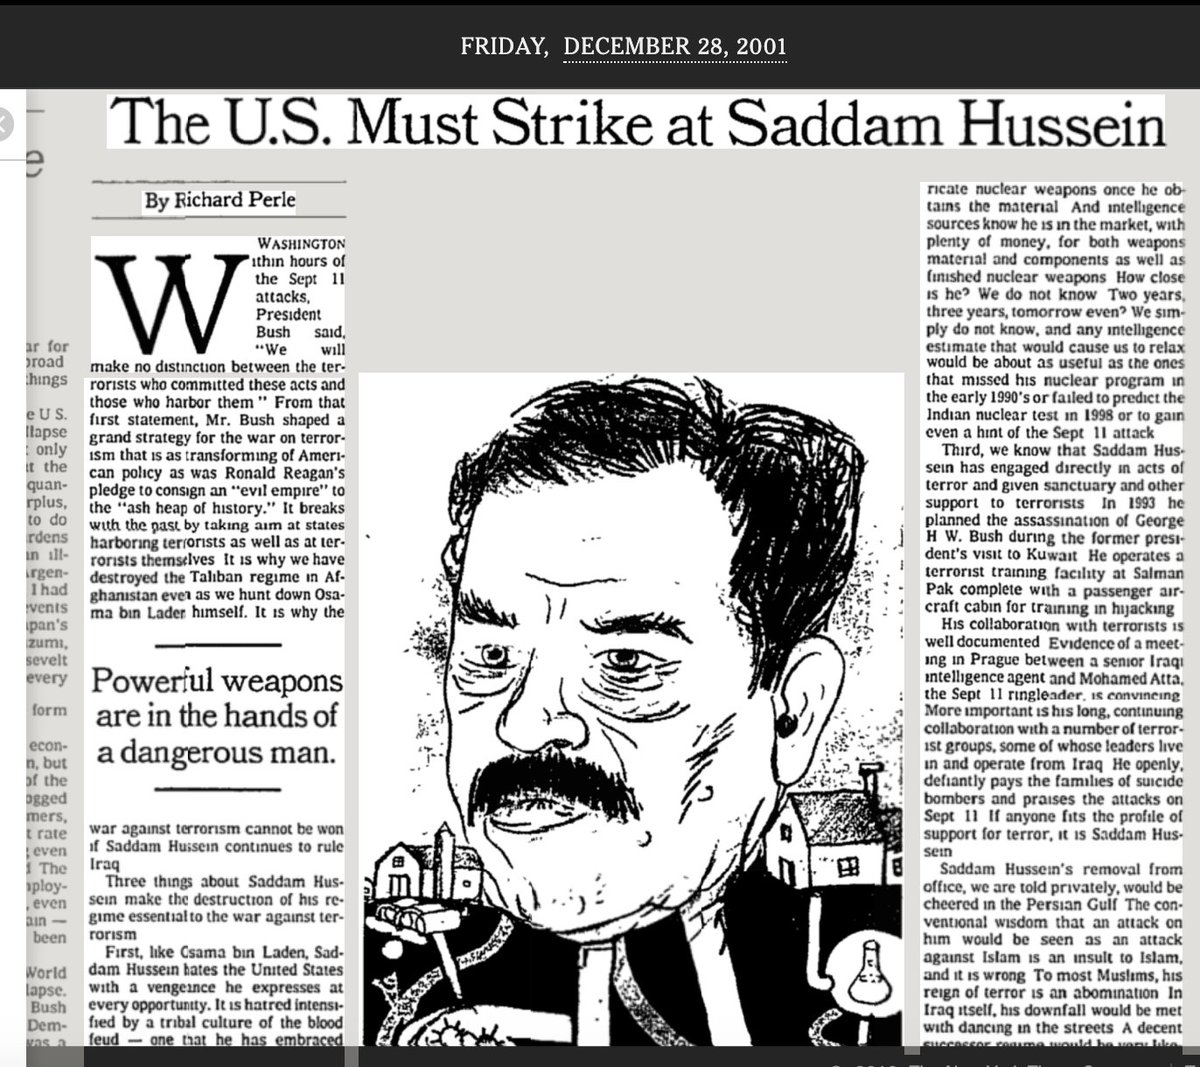 New York Times here implying there was a link between Saddam Hussein and 9/11.